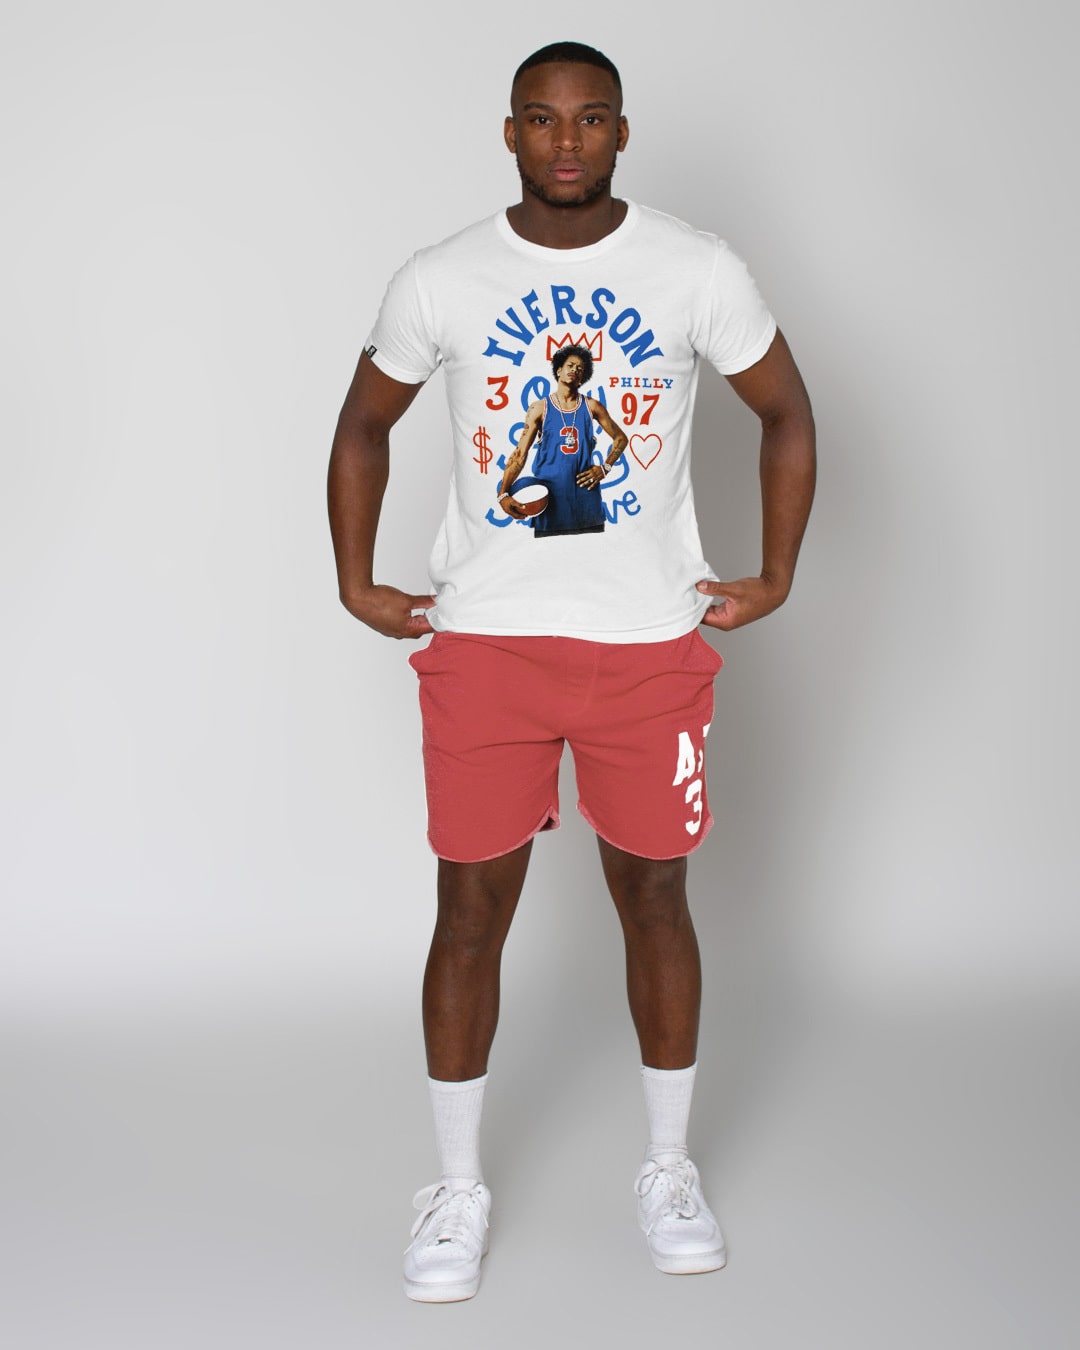 Iverson Philly Photo White Tee Fight Roots - of